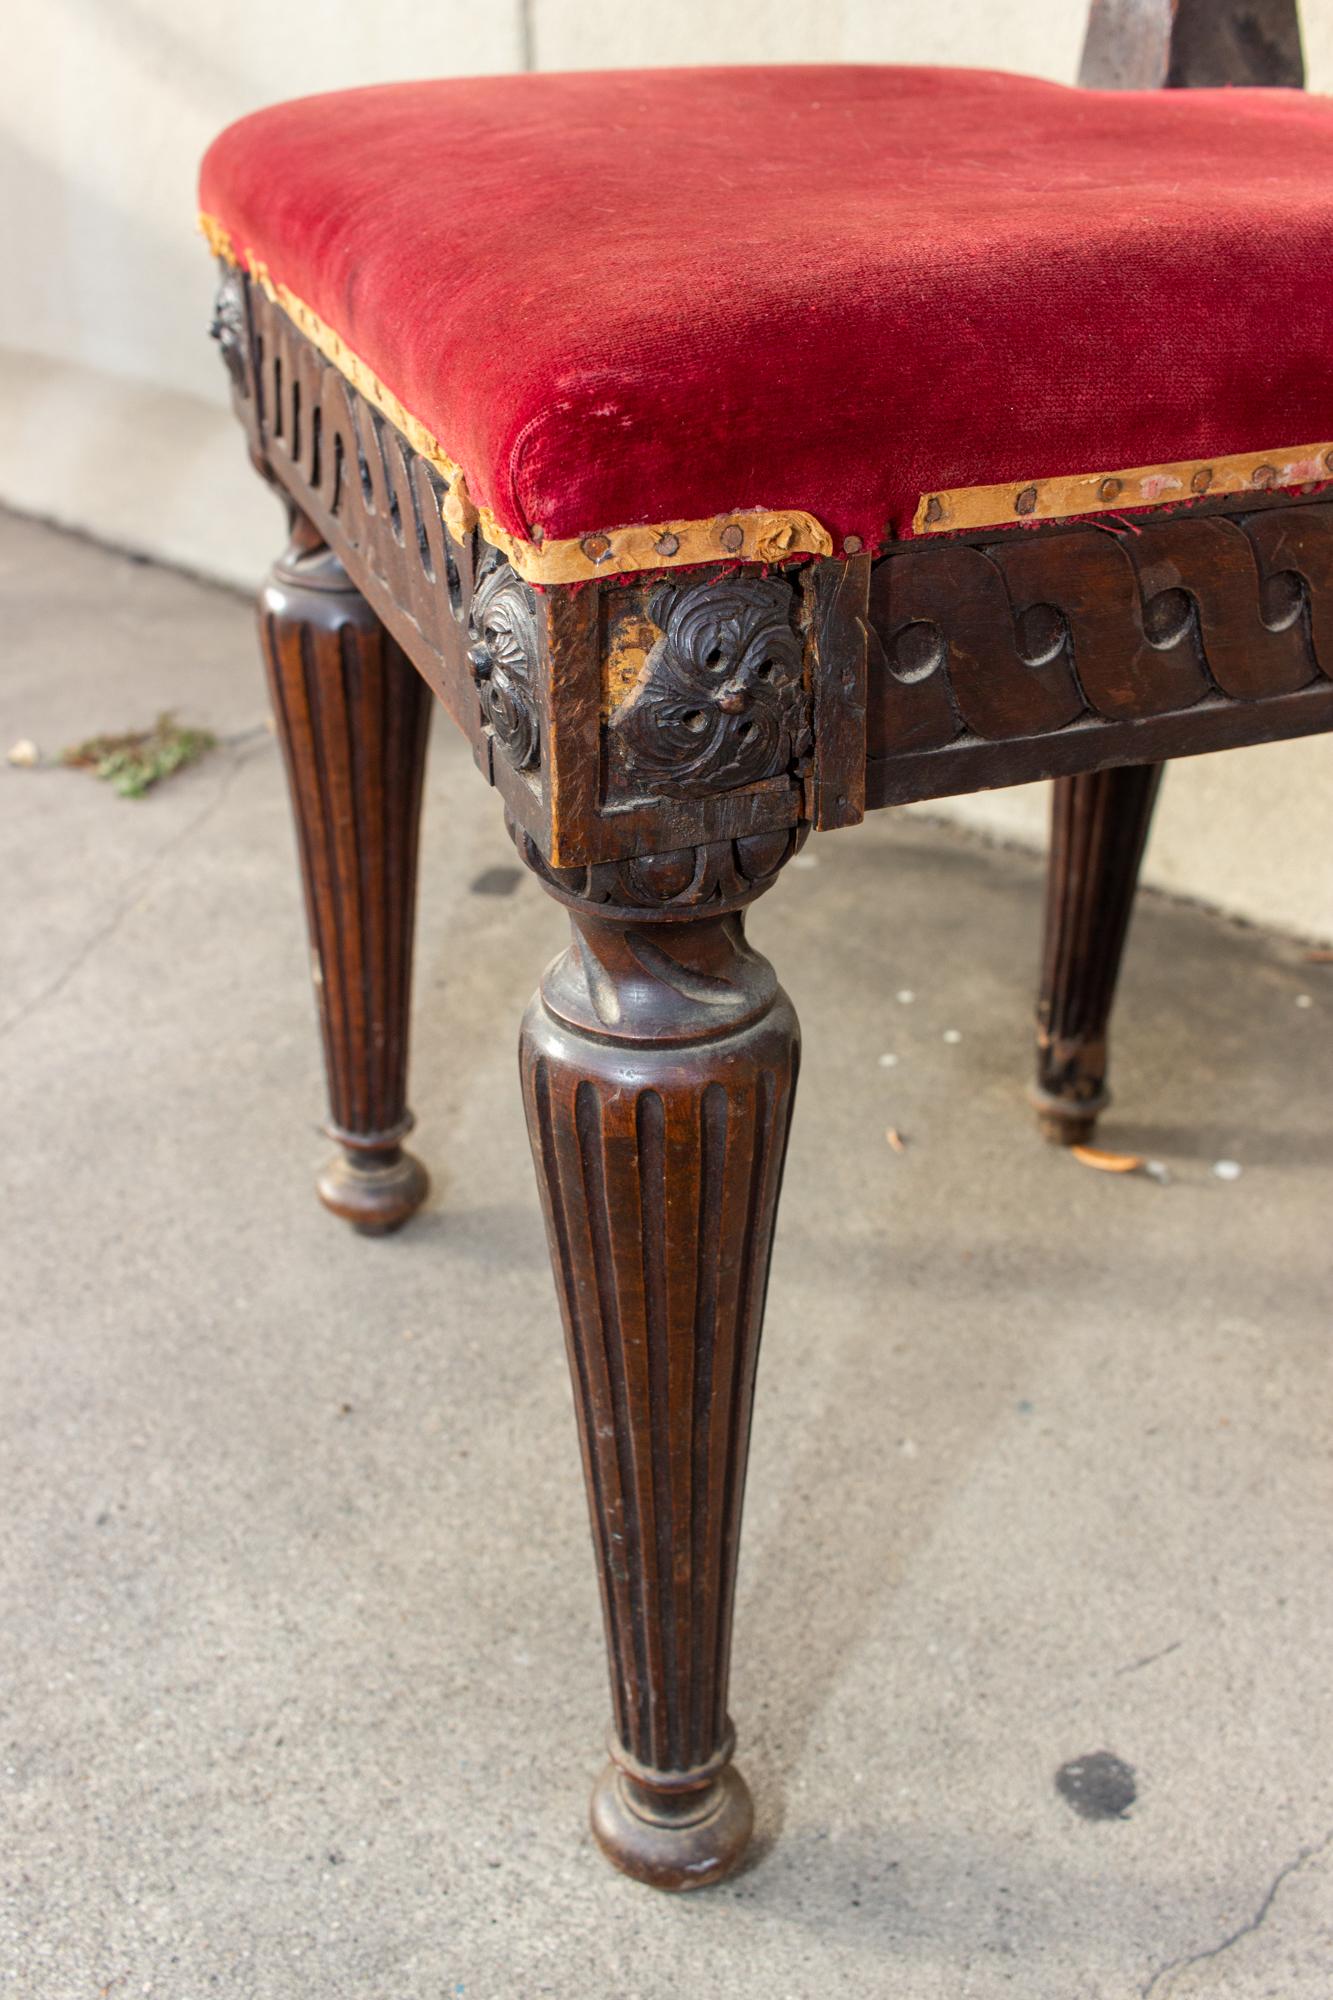 This antique French dining chair is crafted in oak with a red velvet upholstered seat. The curves of the back are wonderful and this piece also has unique carved rosettes and geometric details around the seat edge. The edge of the seat has exposed